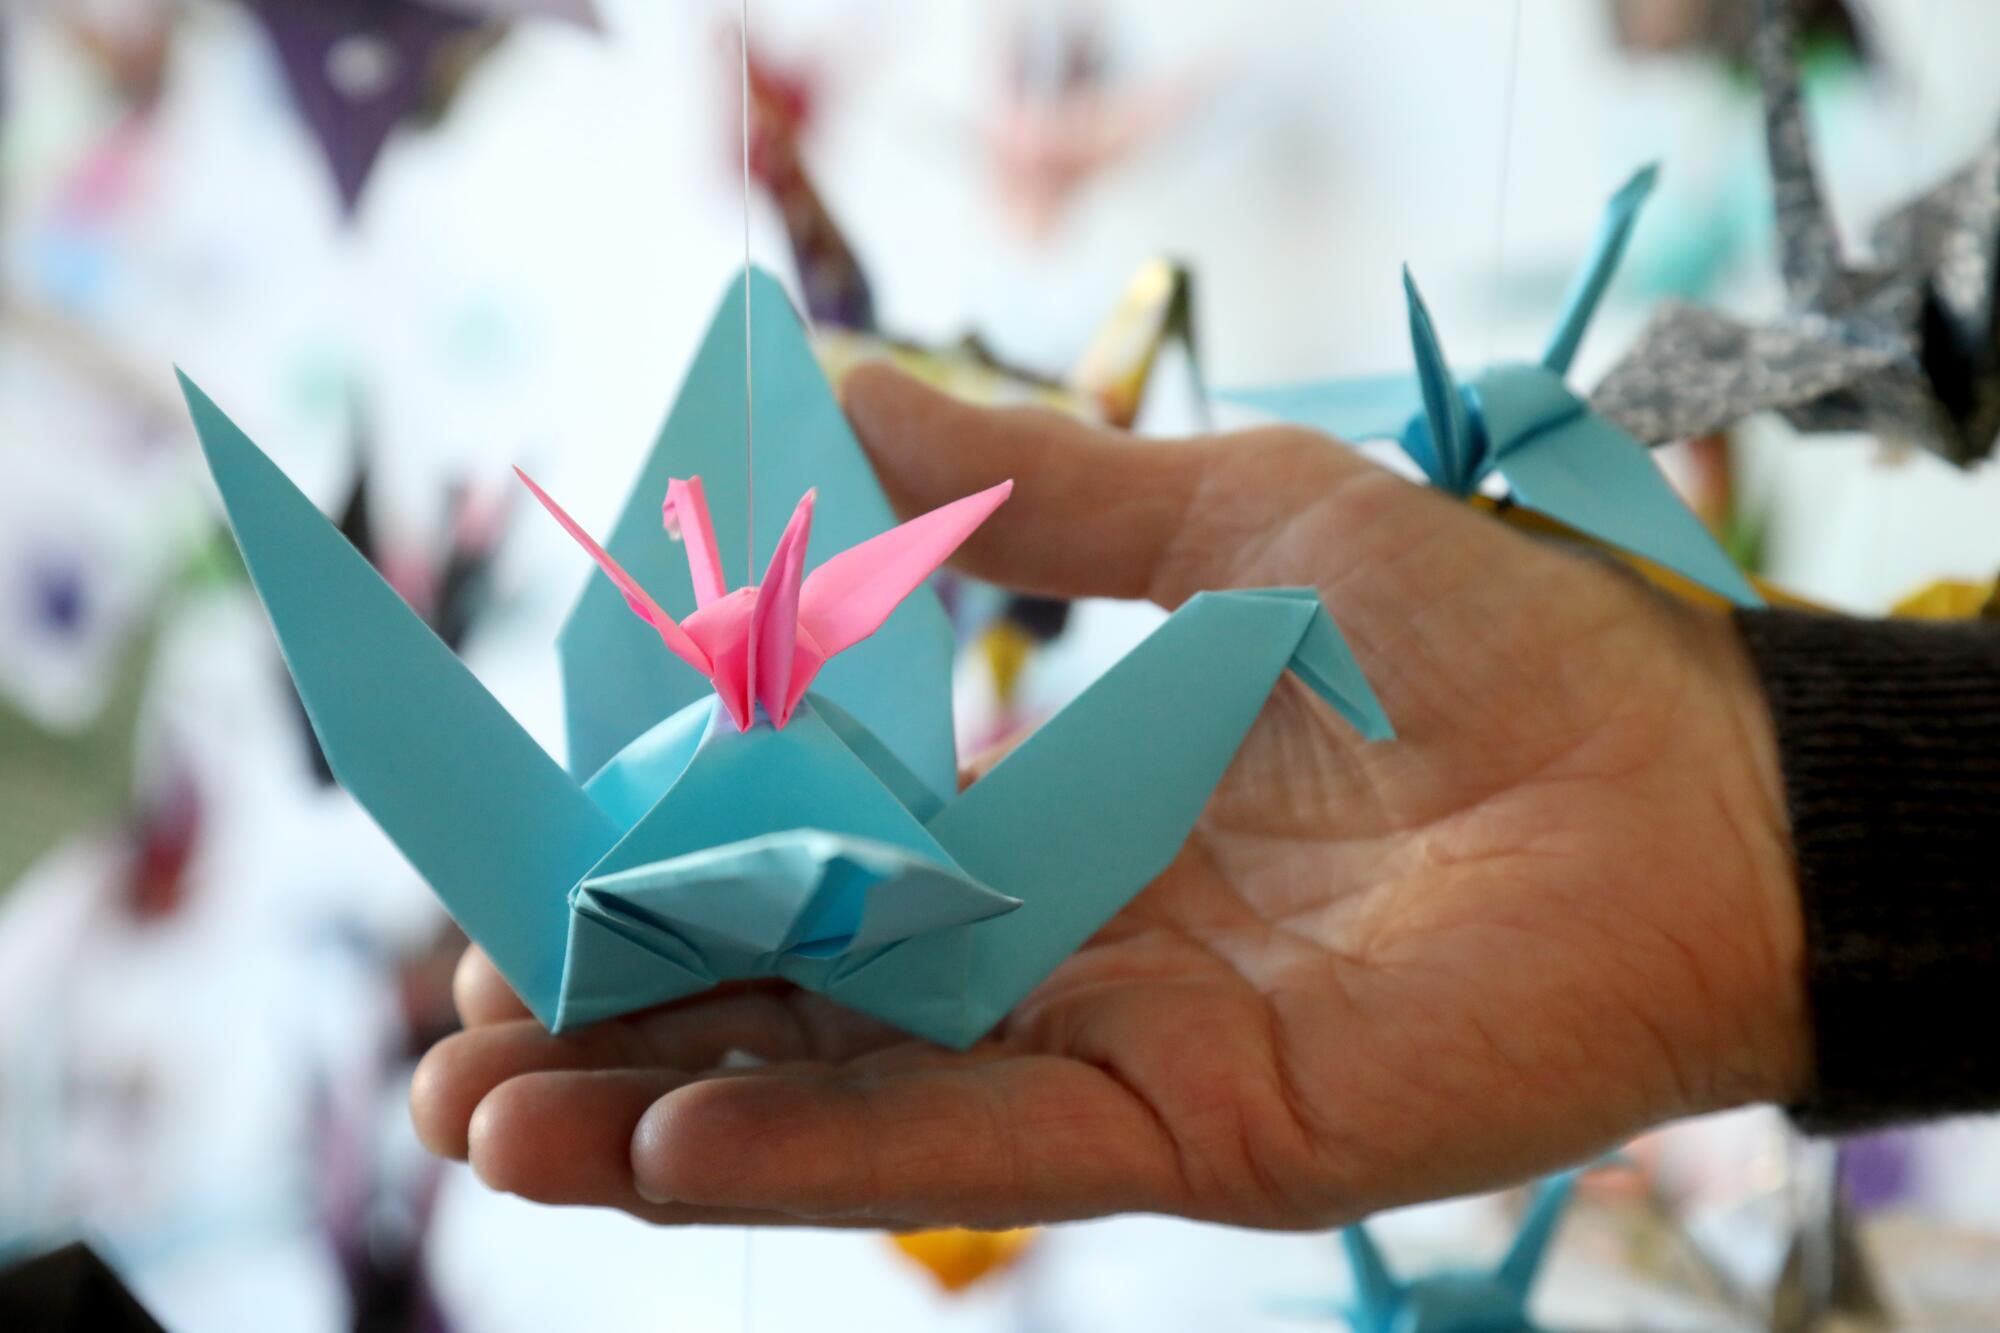 Karla Funderburk holds two colorful paper cranes.